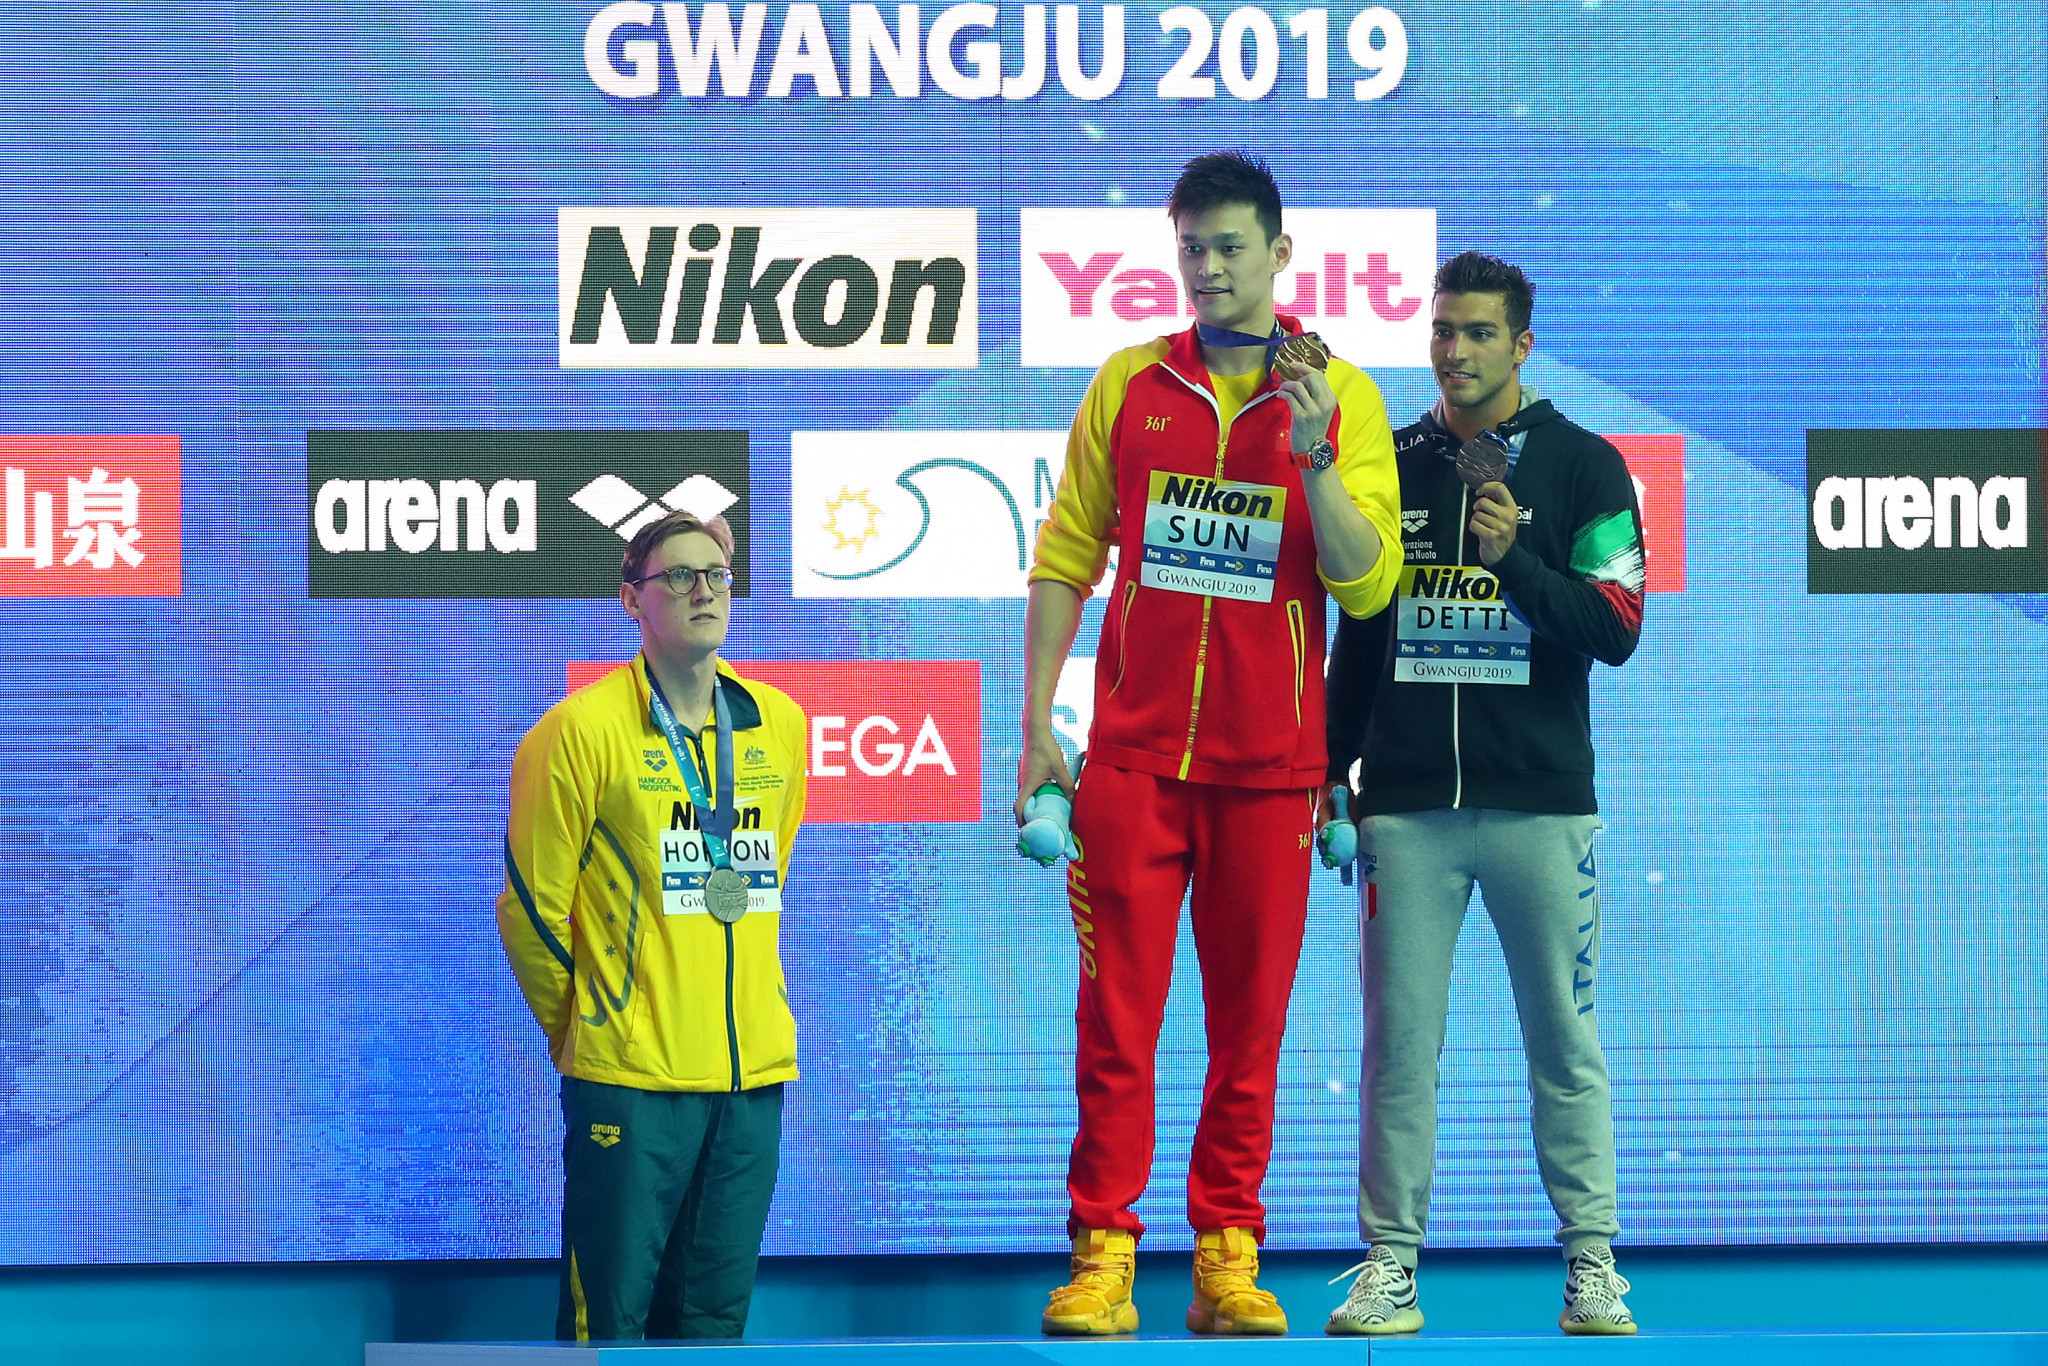 Horton makes podium protest as controversial Chinese swimmer Sun claims gold in Gwangju